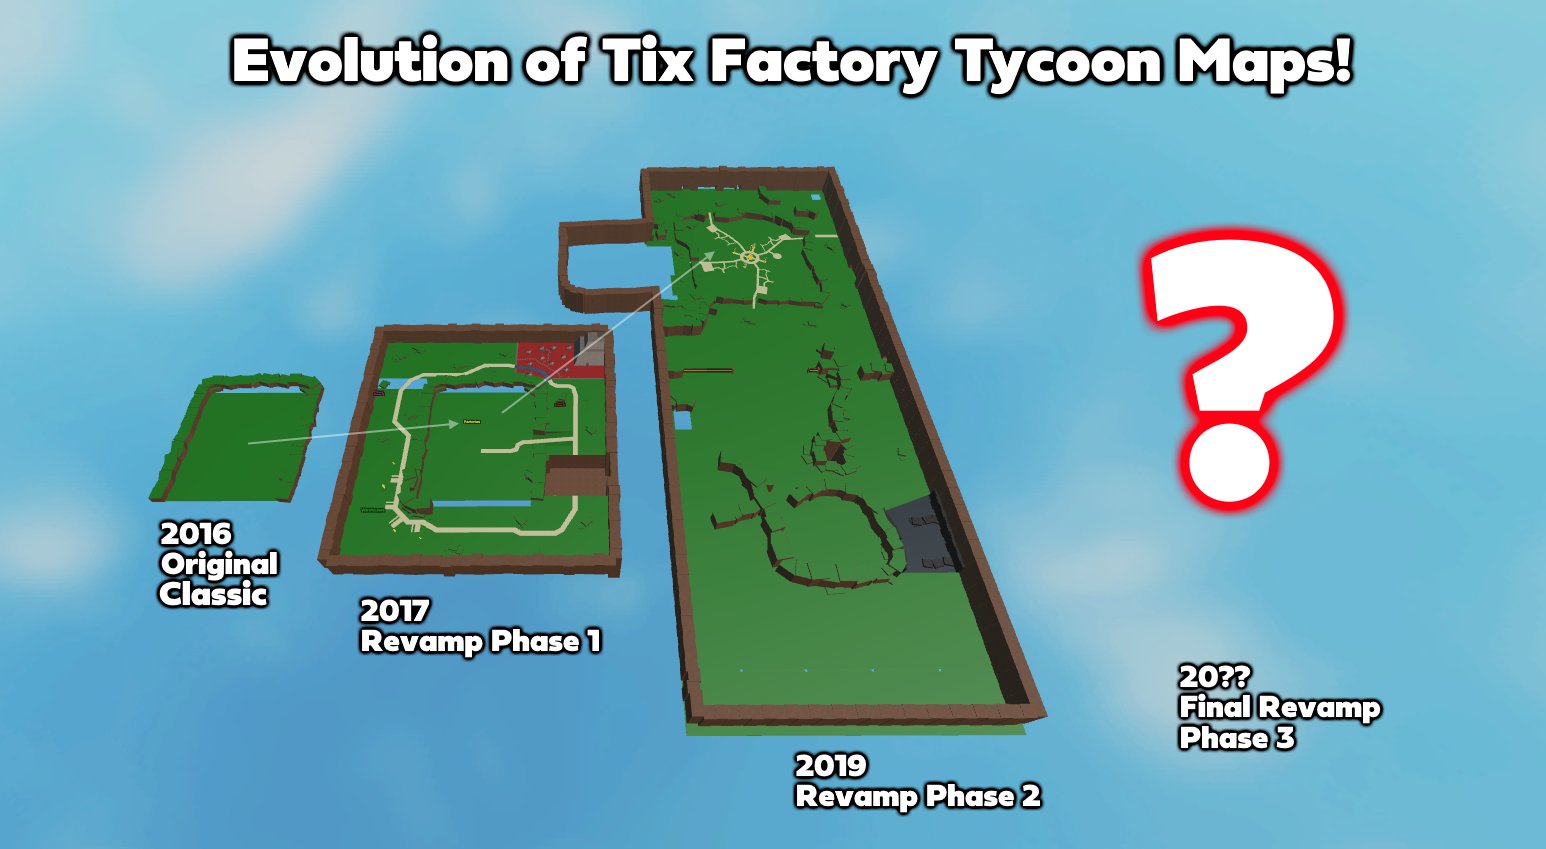 Factory Tycoon - Roblox